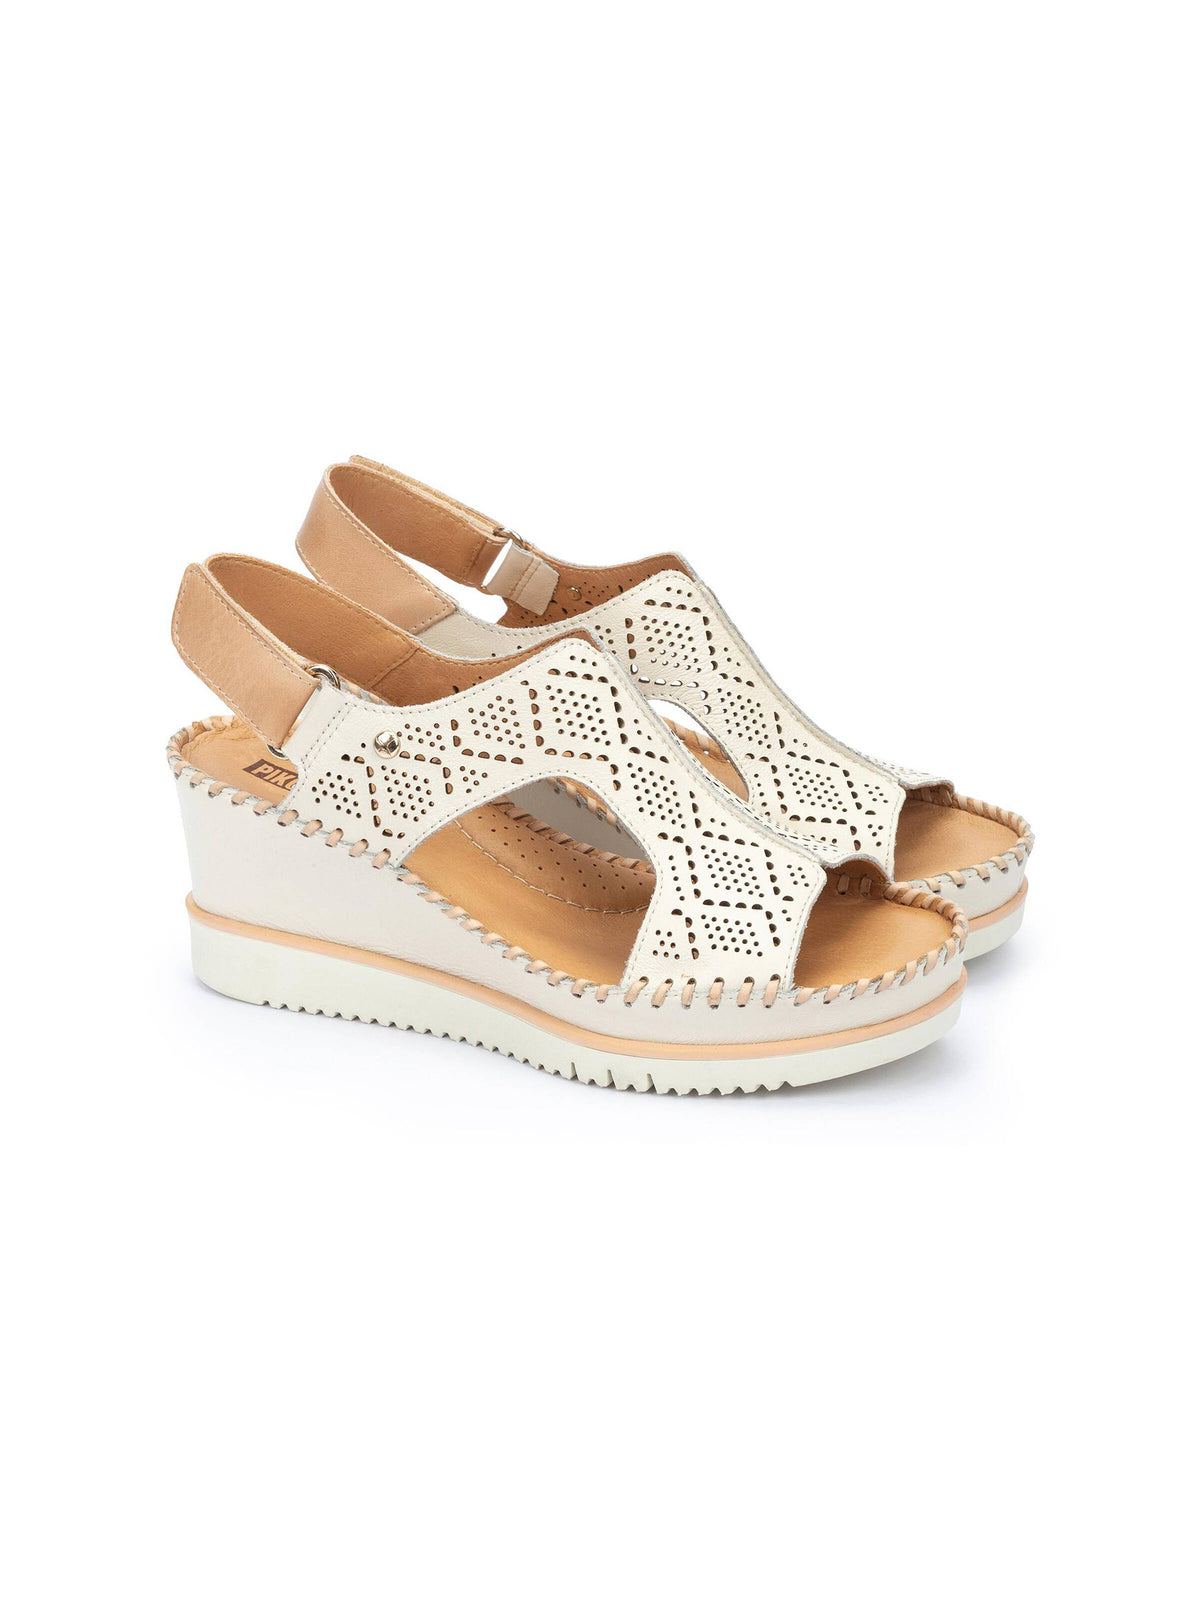 pikolinos aguadulce wedge sandals in nata-pair view